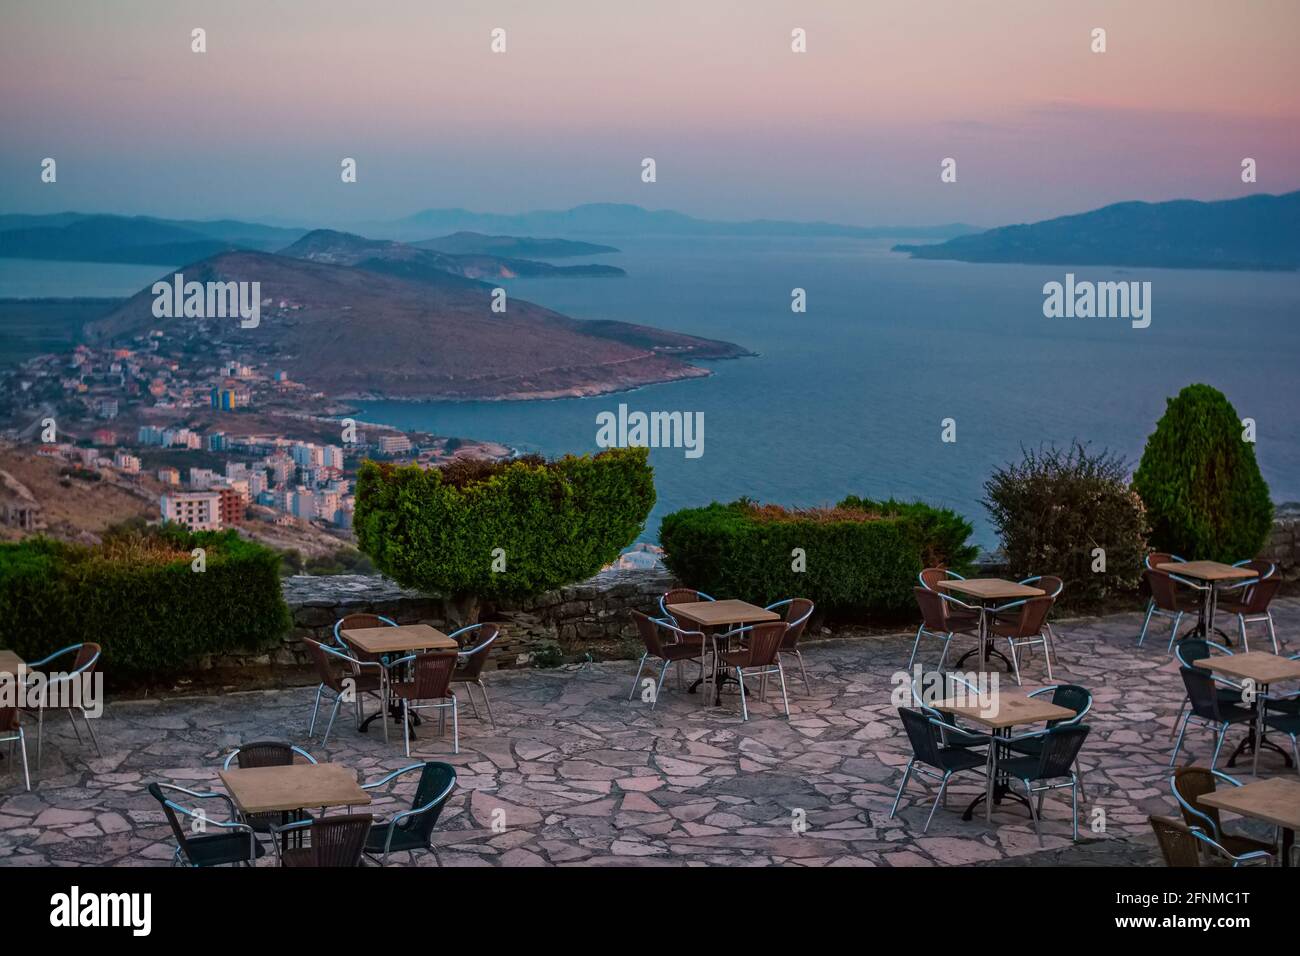 Street café with stunning view – seascape, hills, mountains and islands. Albanian resort Ksamil at sunset. Beautiful landscape. Stock Photo